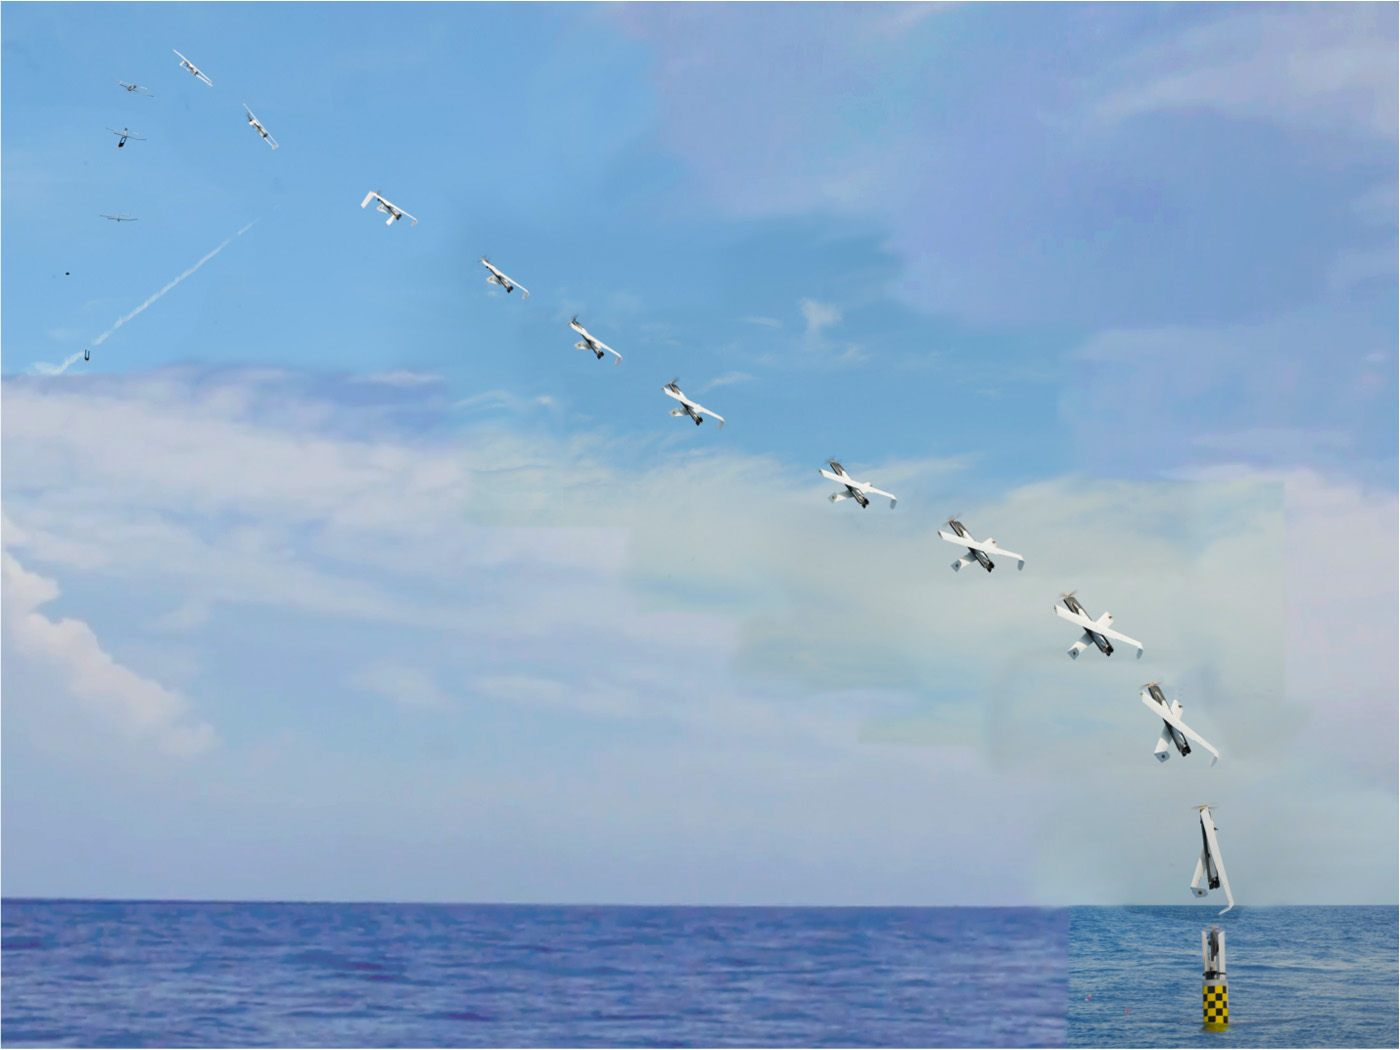 HT navy drone jtm 131206 Now the US Can Launch Drones From Underwater